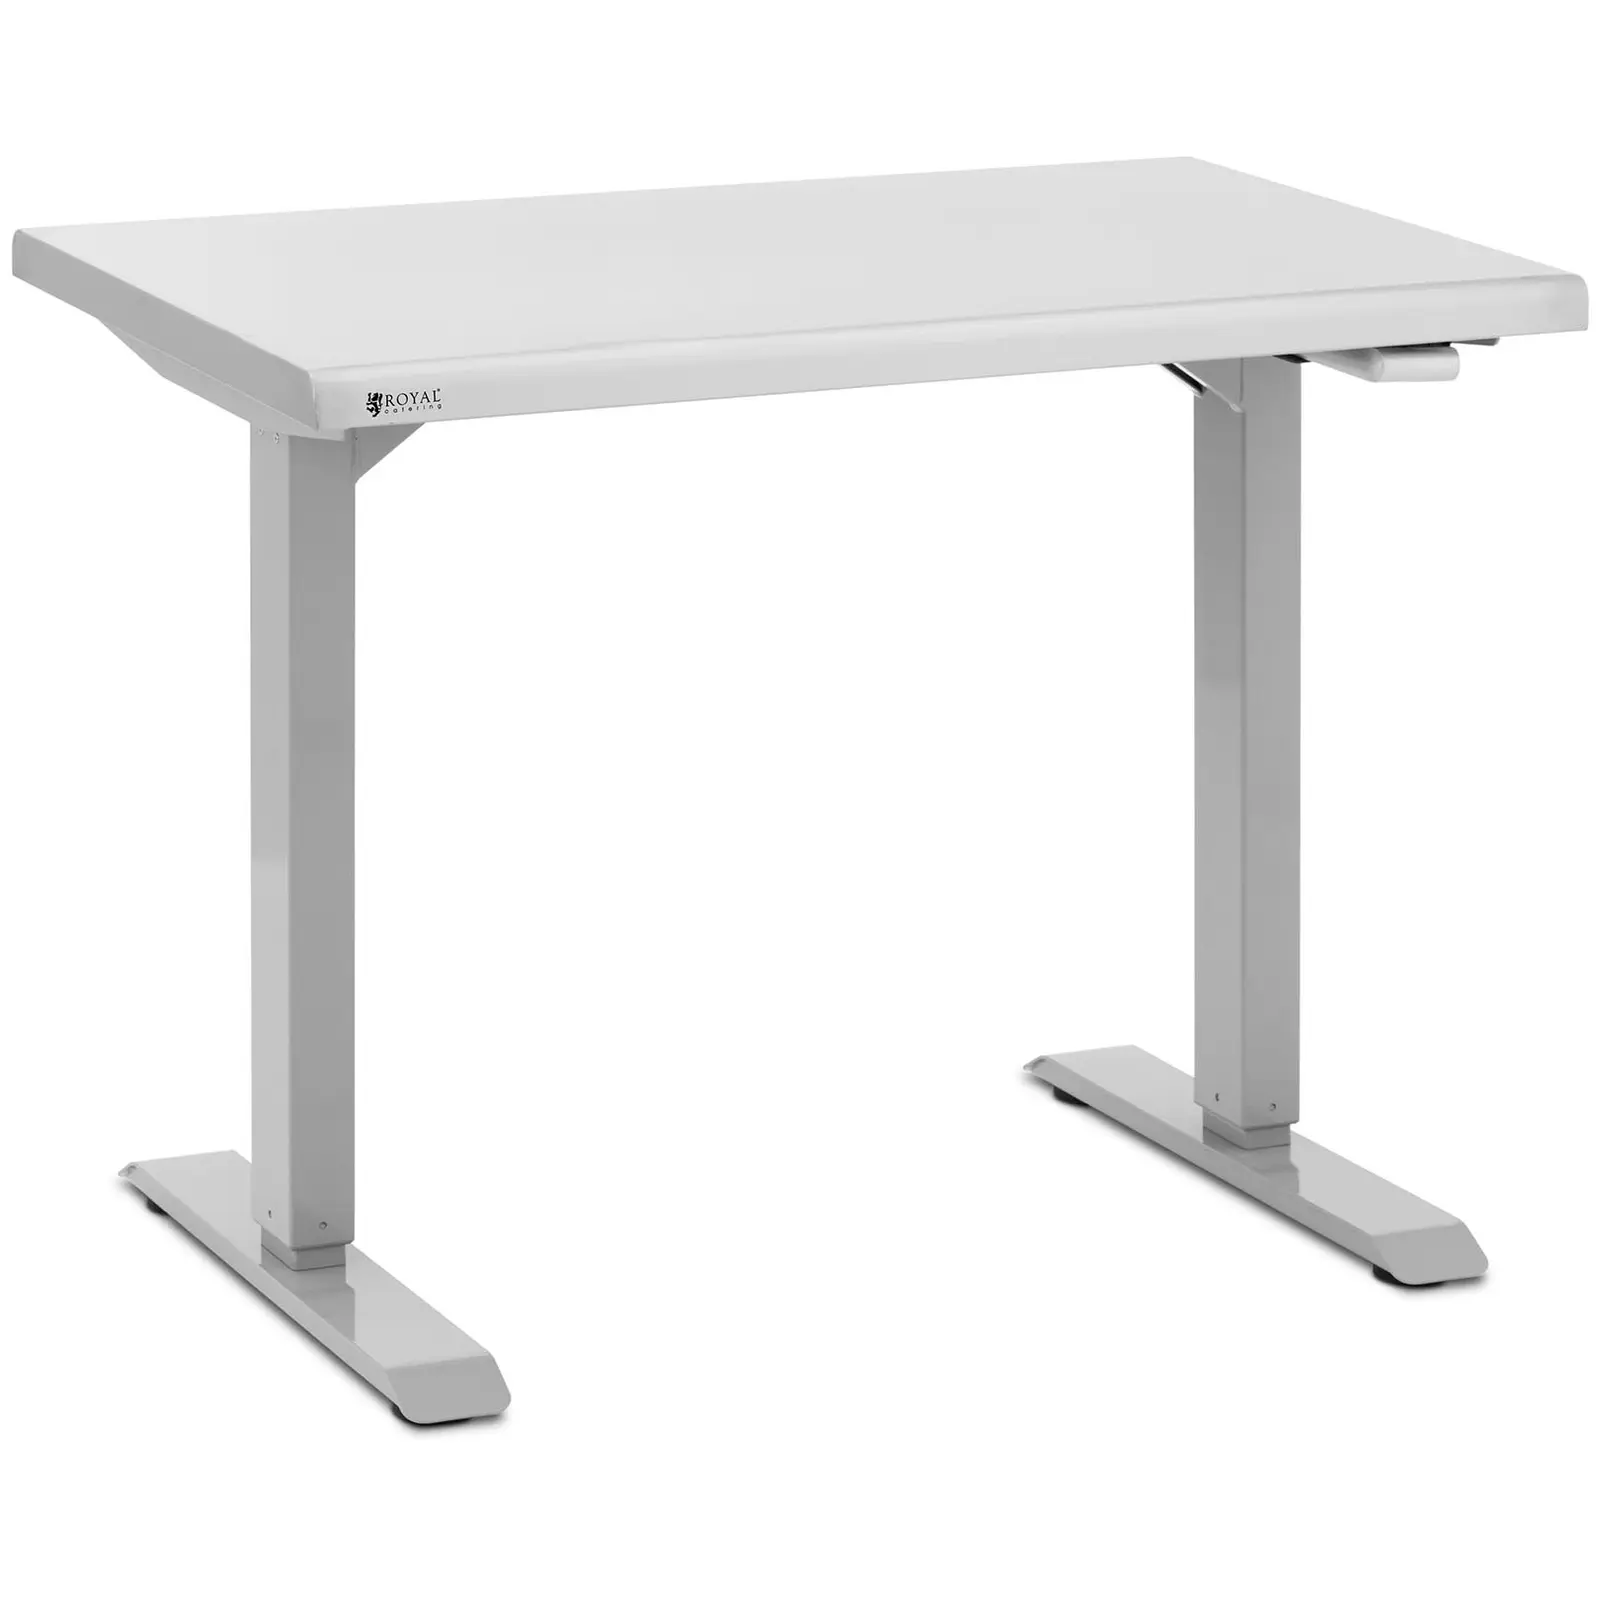 Stainless Steel Table - height adjustable - 96 x 60 x 71,5 - 117 cm - 70 kg load capacity - Royal Catering